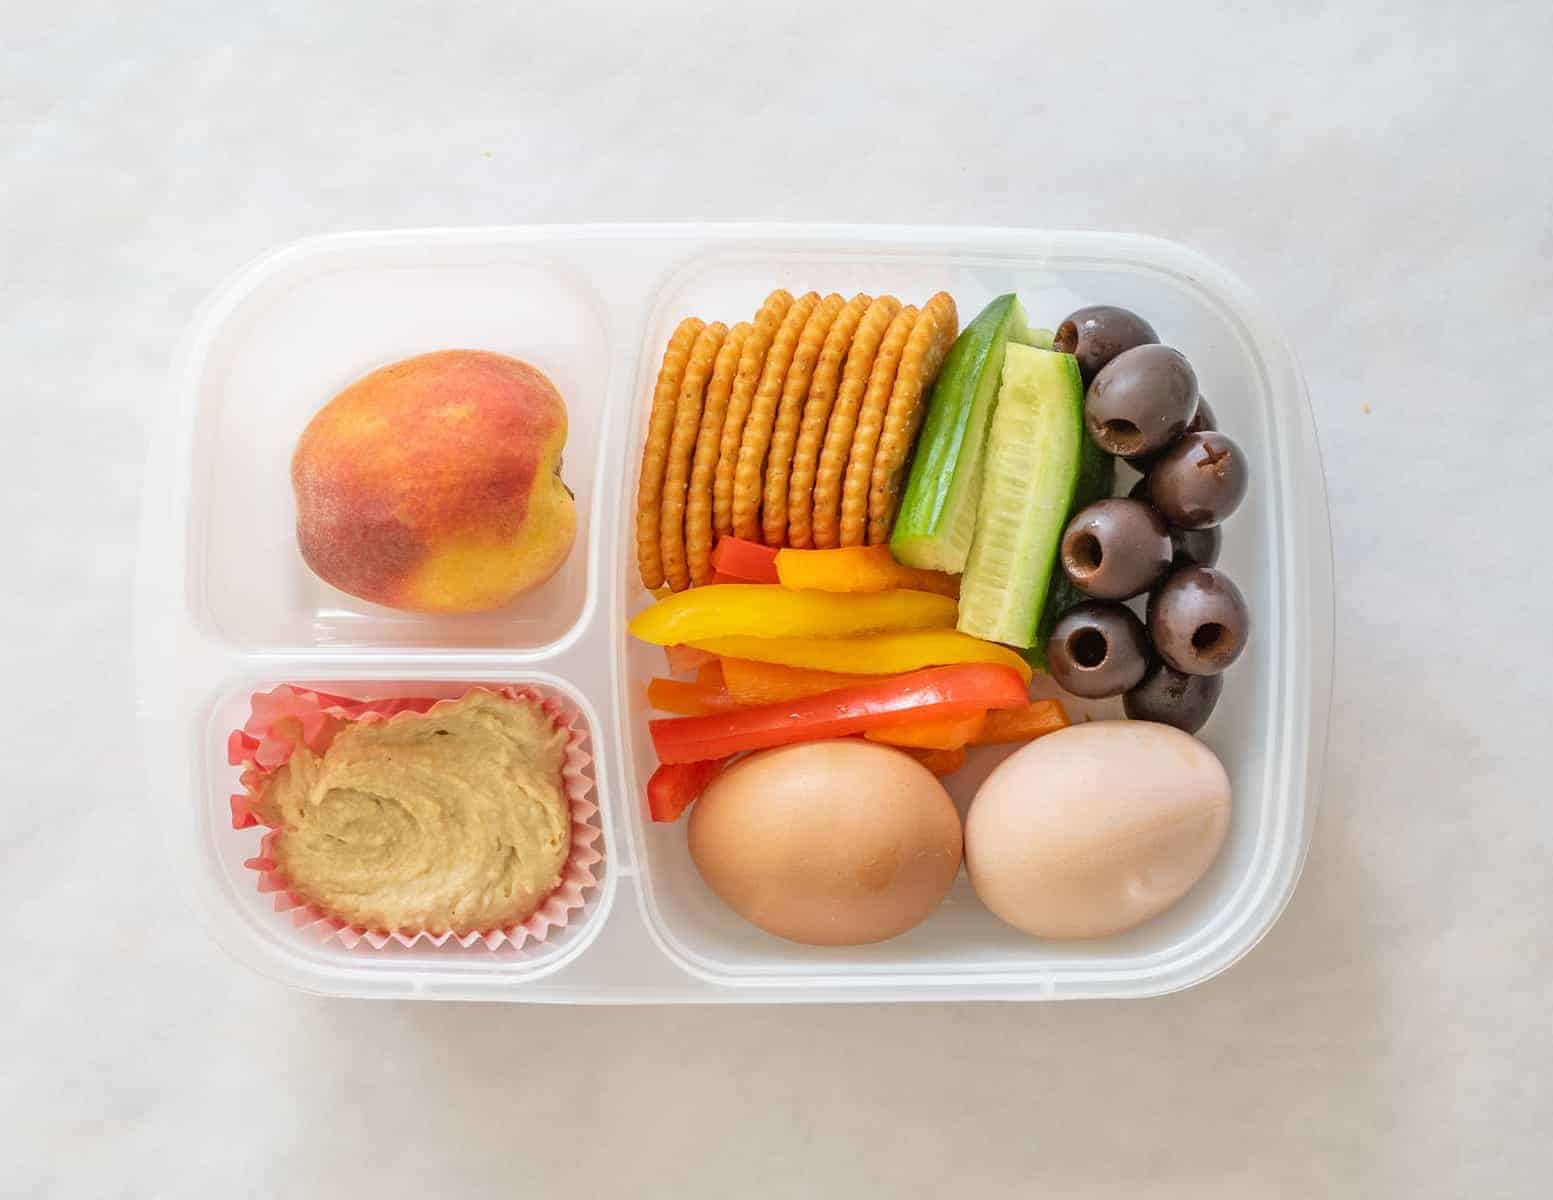 Quick and easy school and adult lunch box ideas made with Sabra Hummus, fruit, vegetables, and more. 